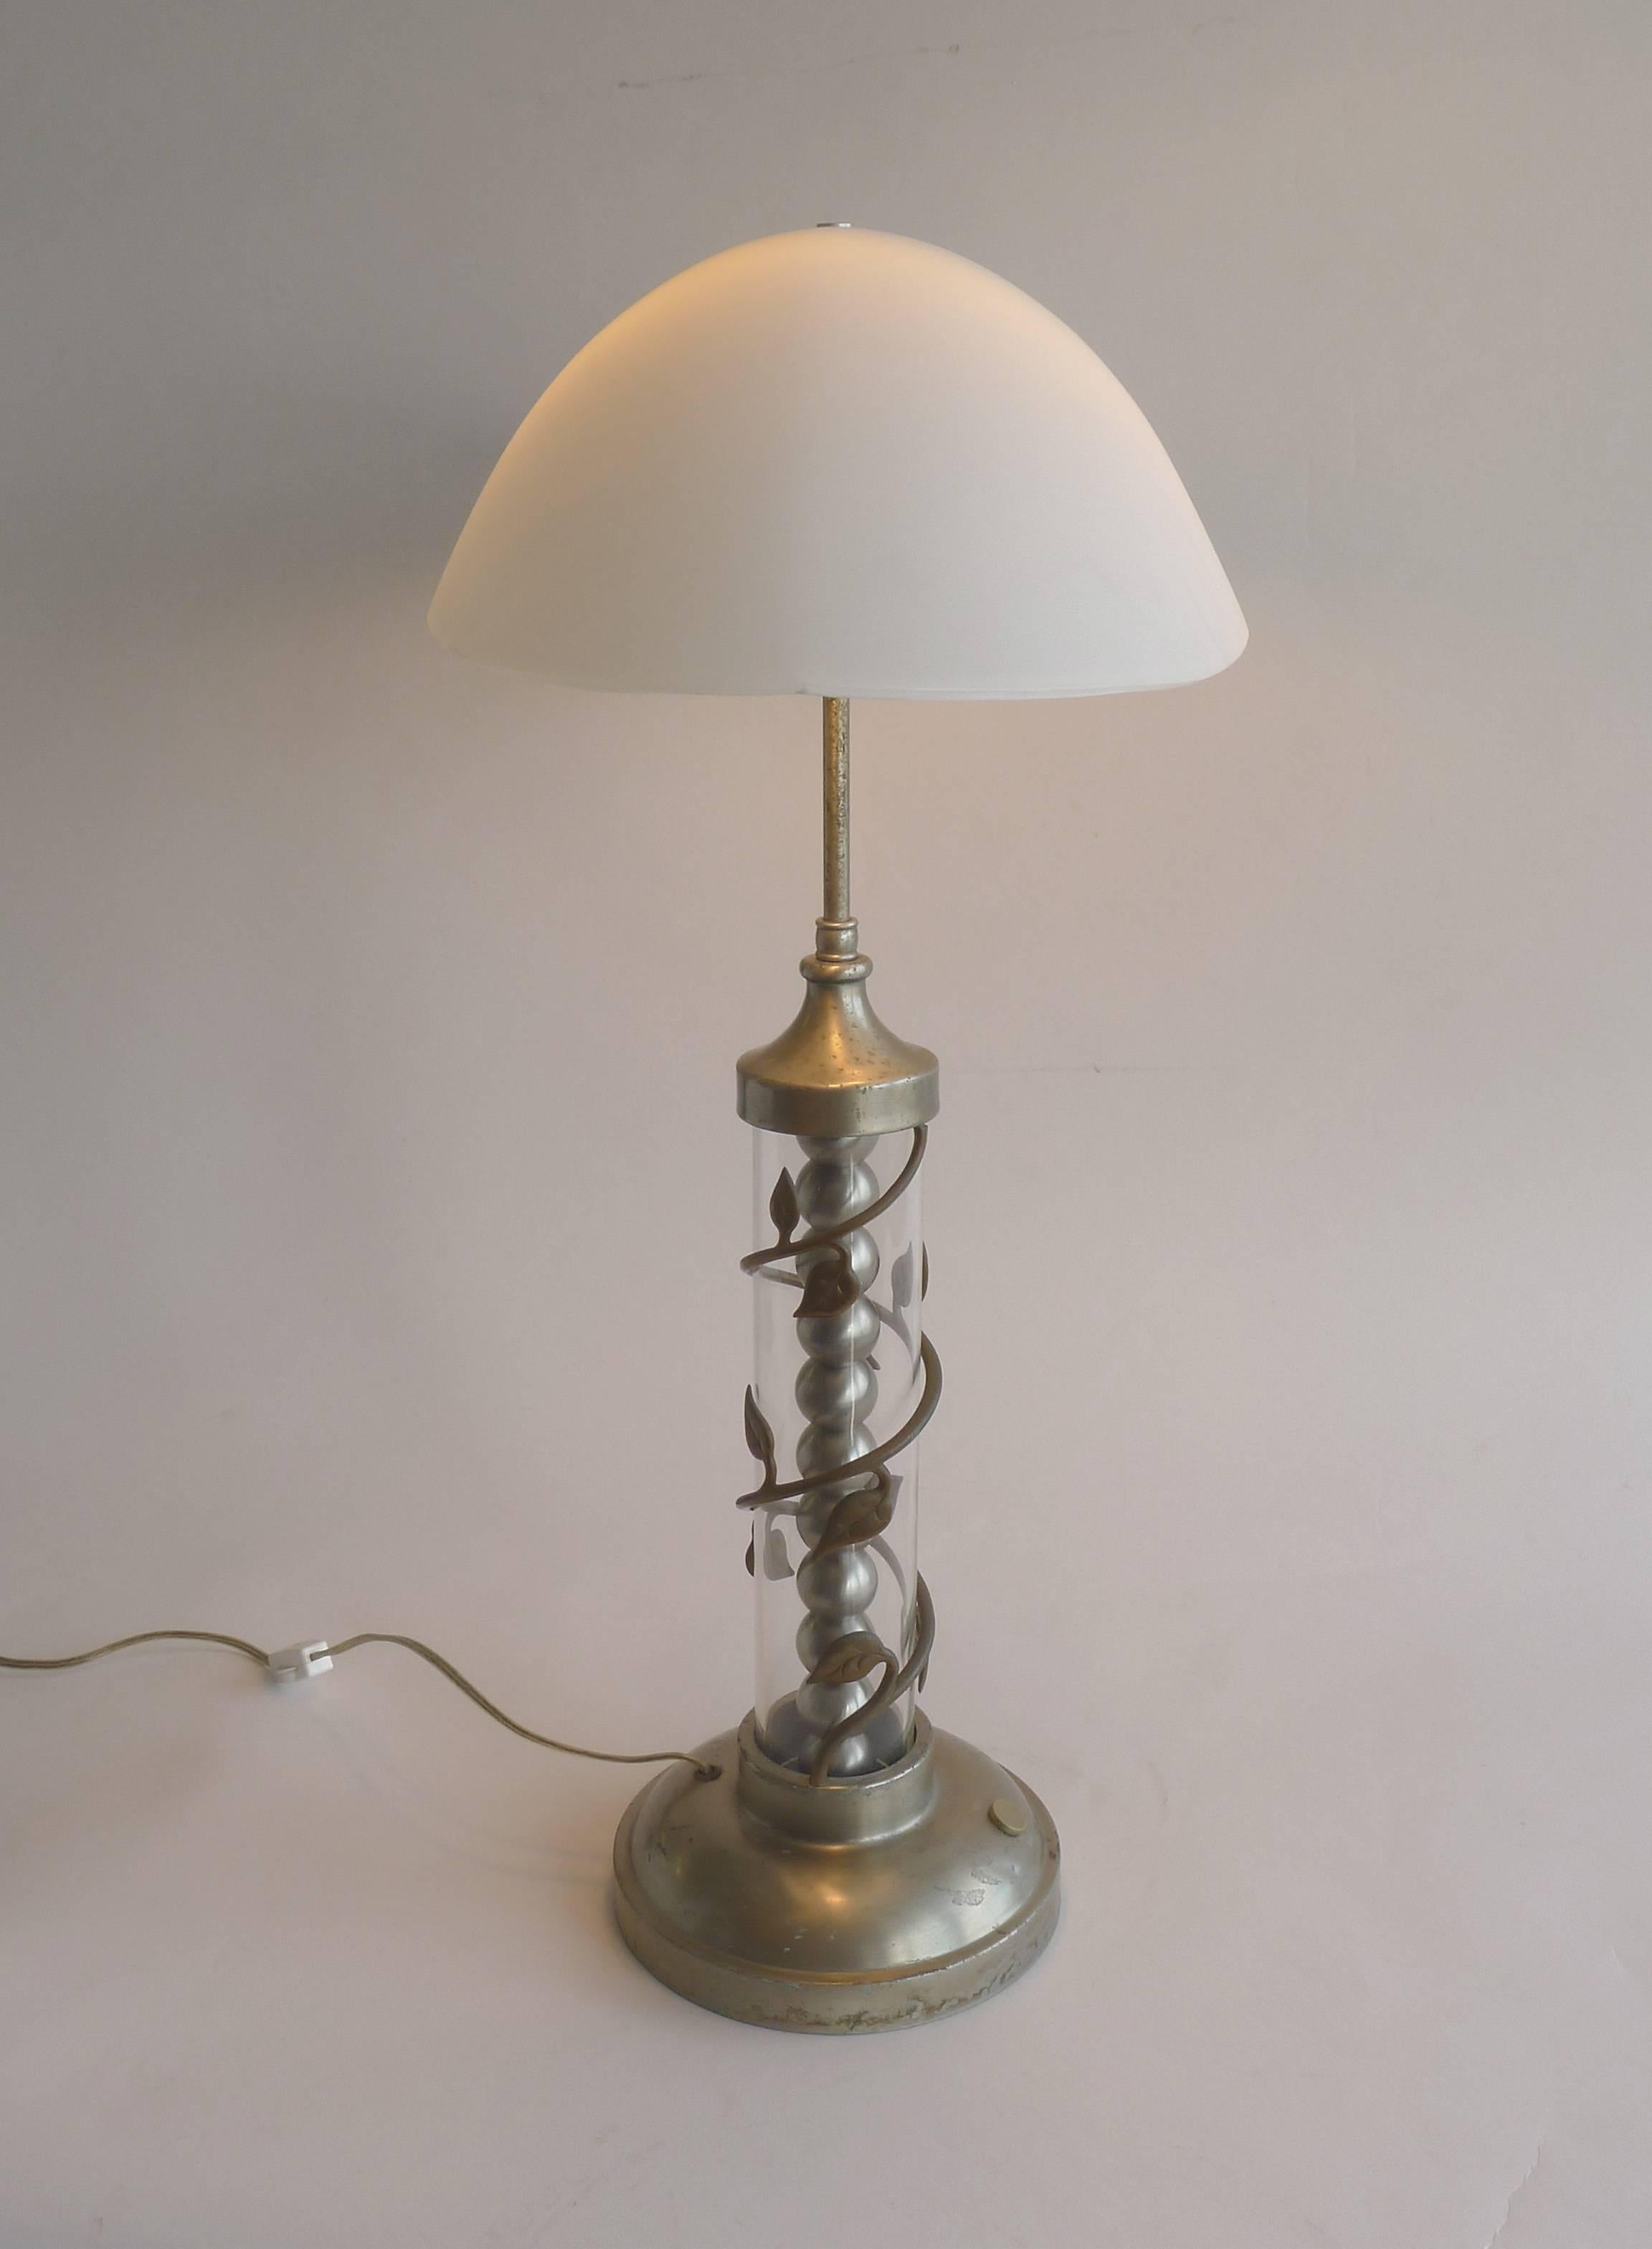 1940's table lamps